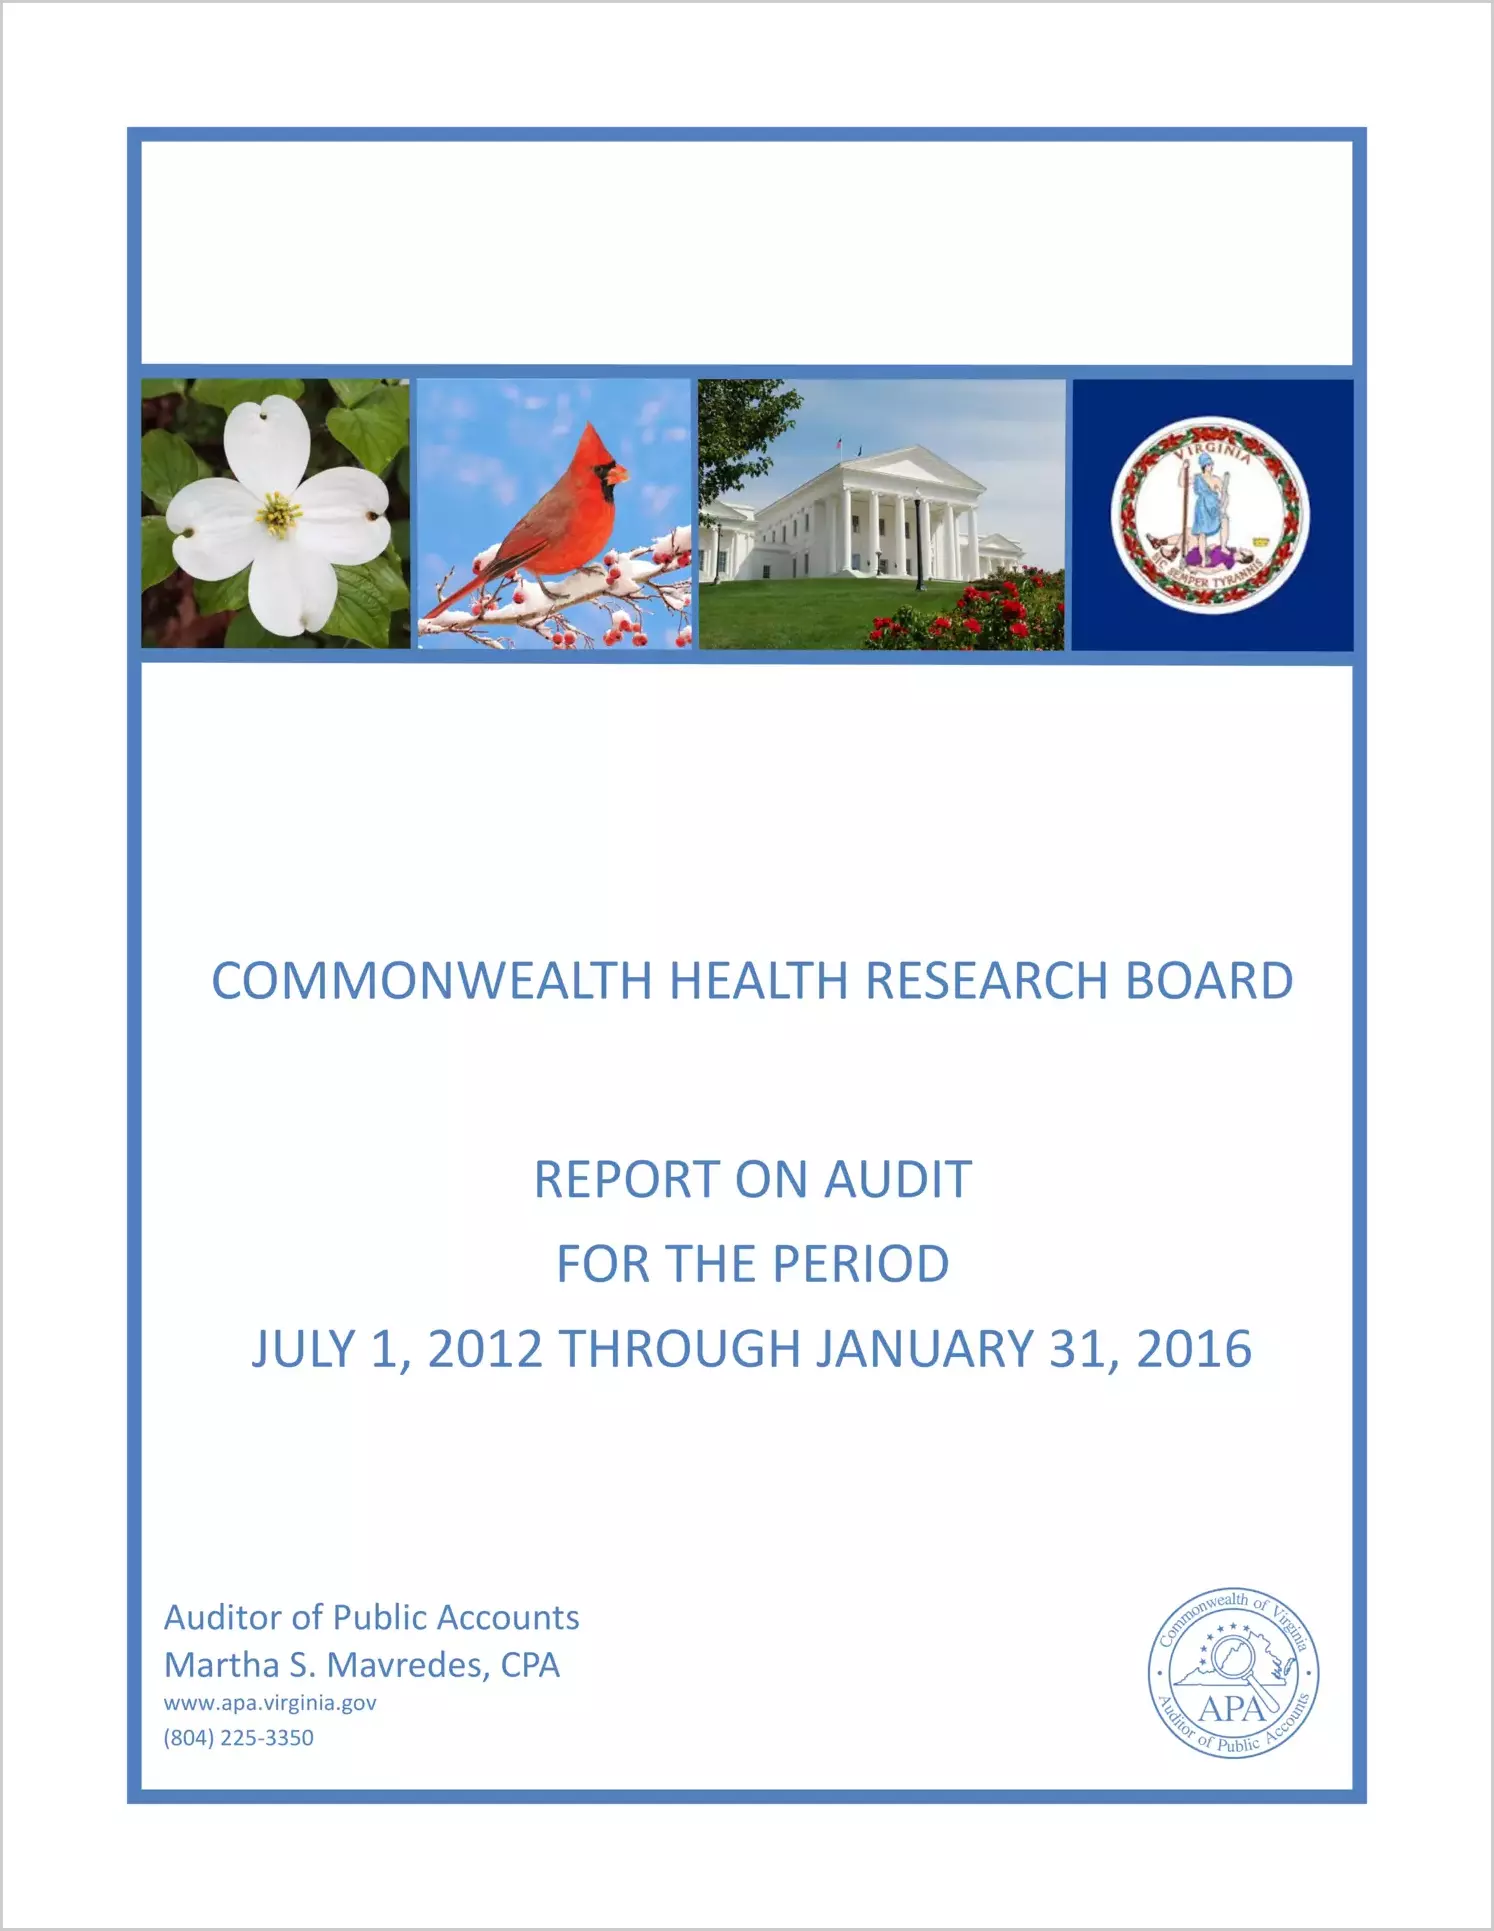 Commonwealth Health Research Board Report on Audit for the Period July 1, 2012 through January 31, 2016